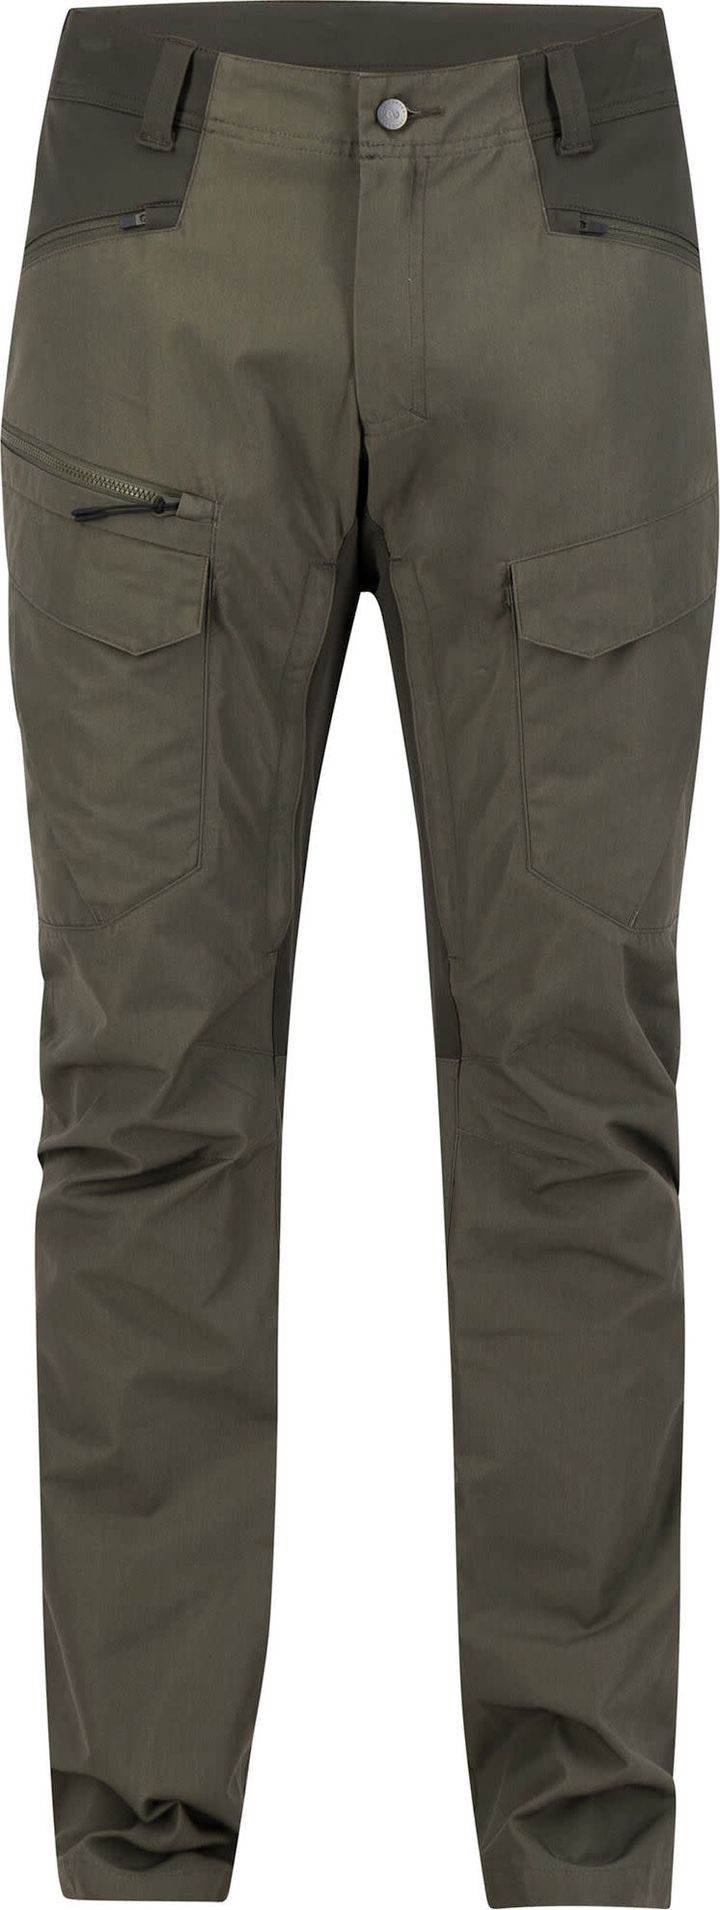 Lundhags Men's Fulu Cargo Strech Hybrid Pant Forest Green Lundhags